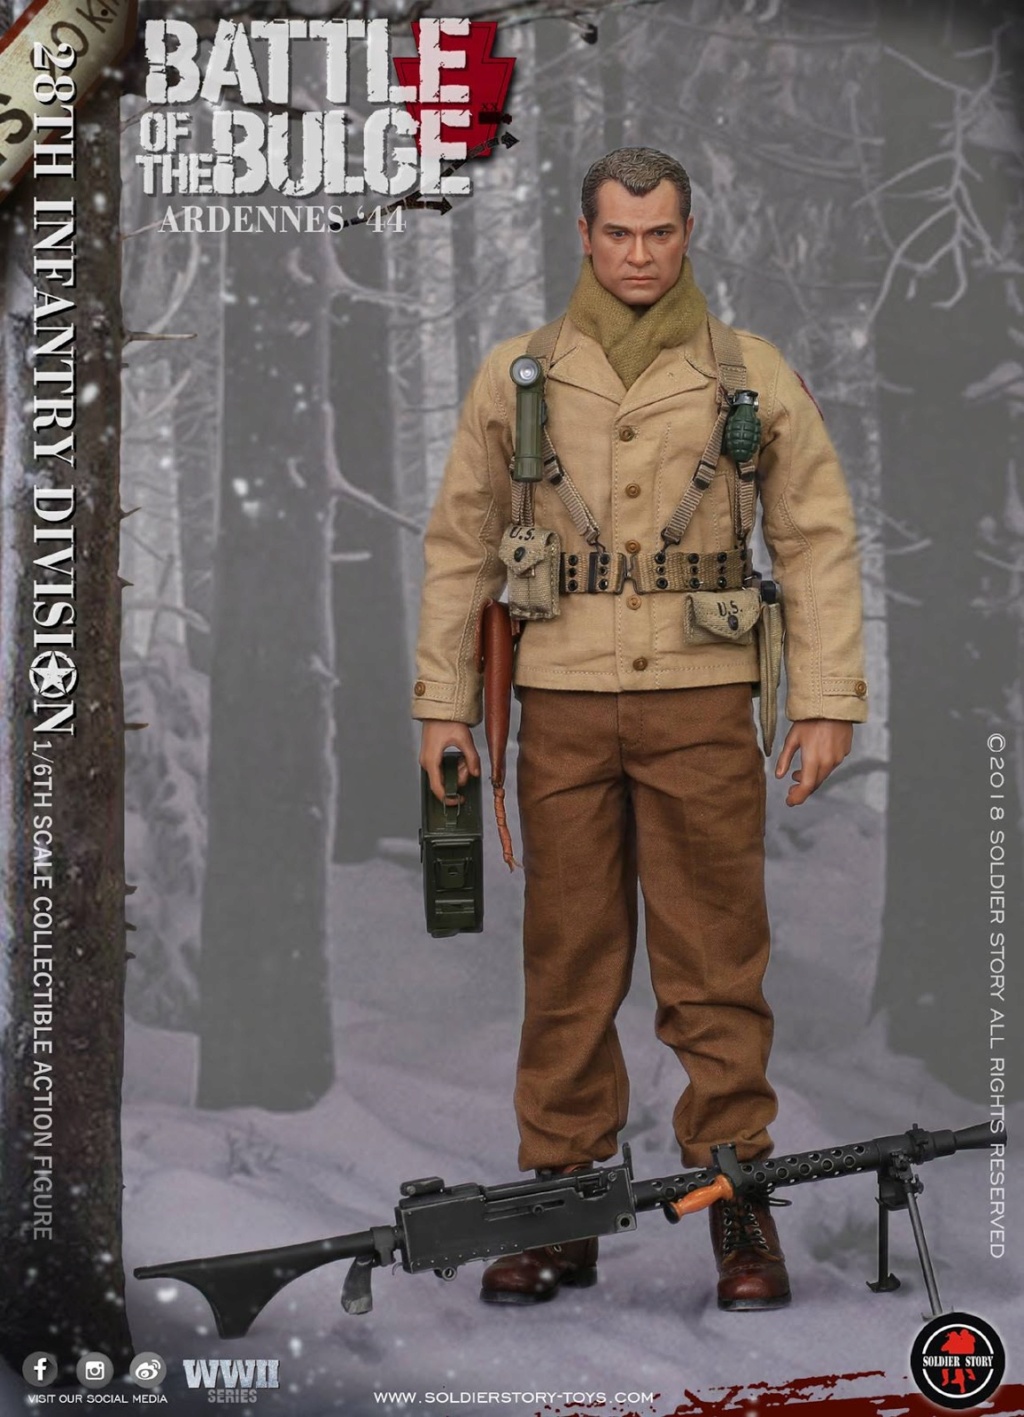 28thInfantry - NEW PRODUCT: Soldier Story: 1/6 scale U.S. Army 28th Infantry Division Ardennes 1944 Bulge112